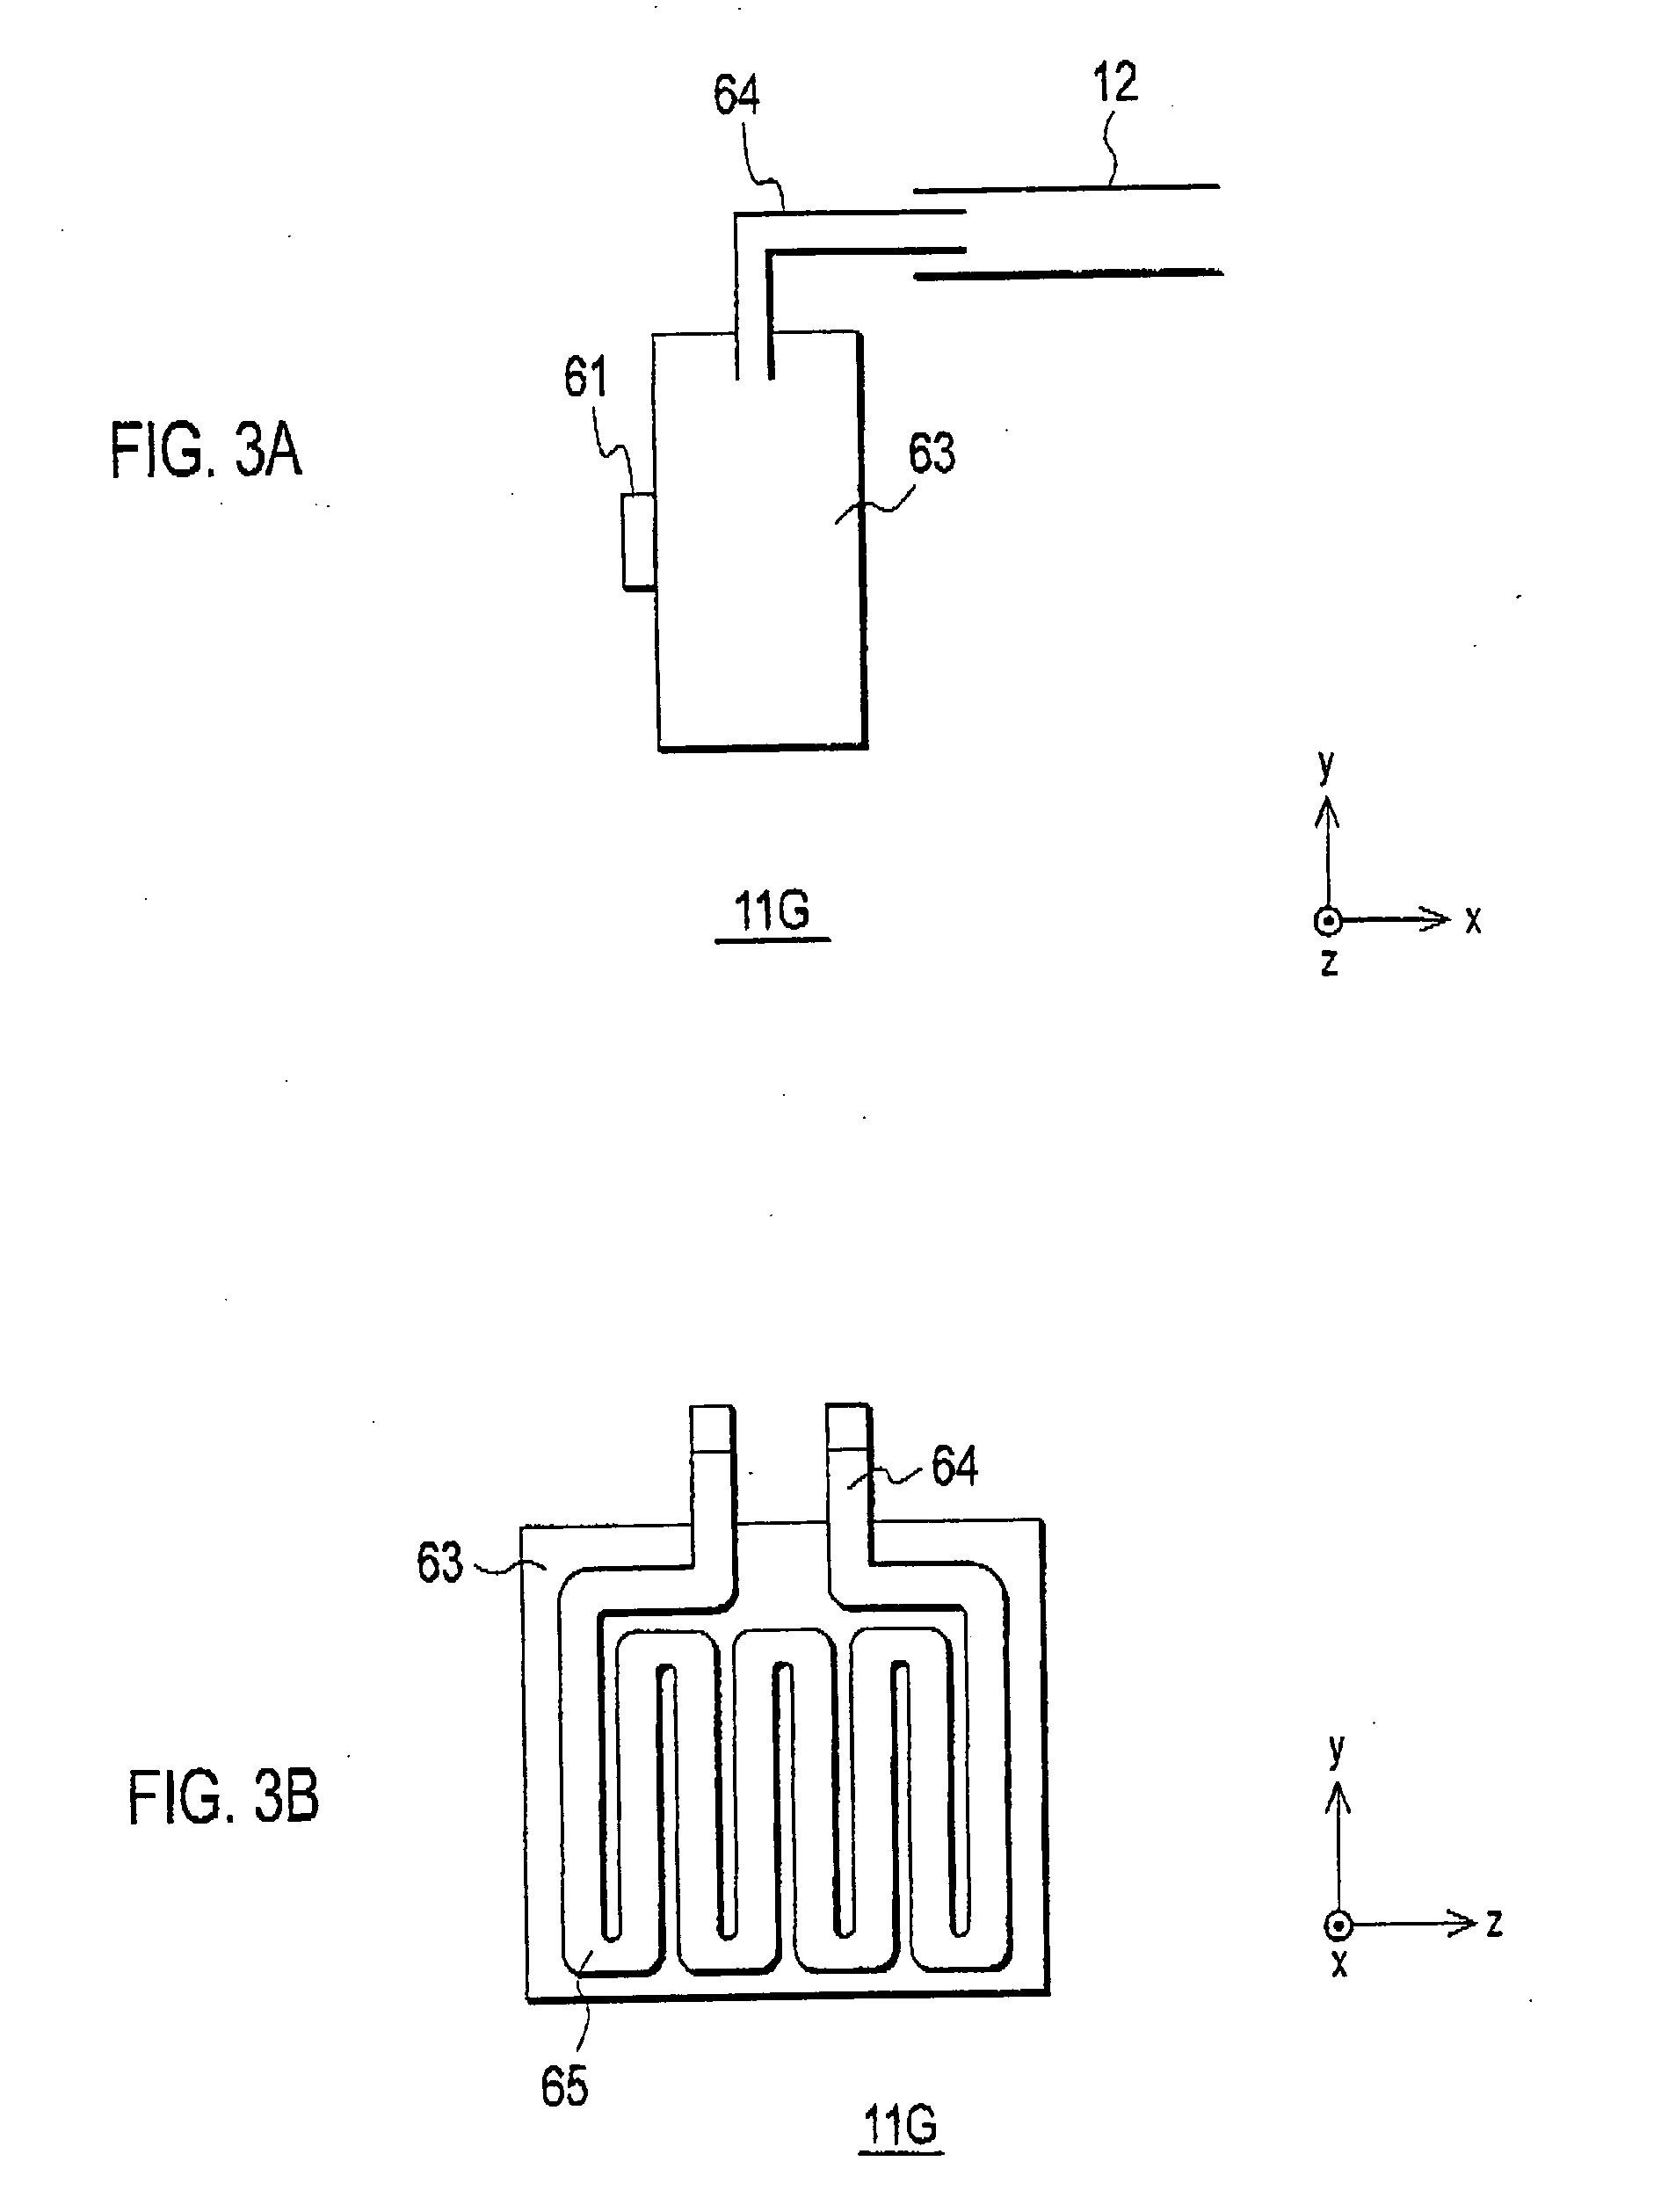 Projection-type image display device